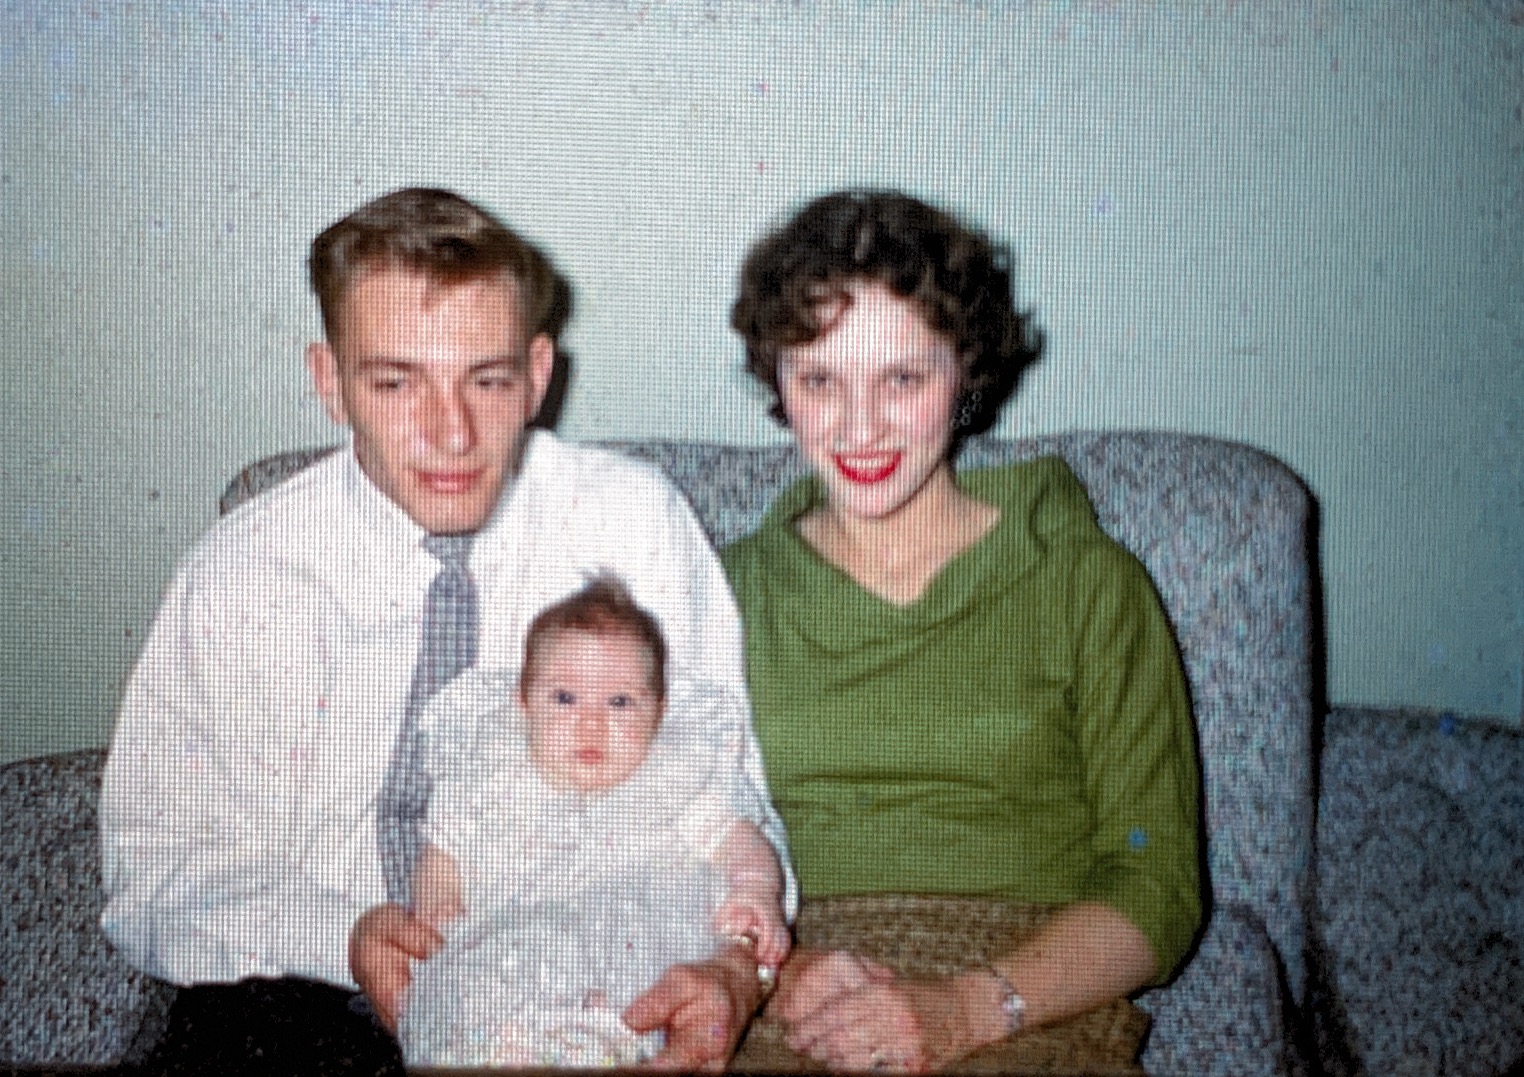 Teri, Dad& Mom 1955 maybe Christmas Teri would be about 3 weeks old.